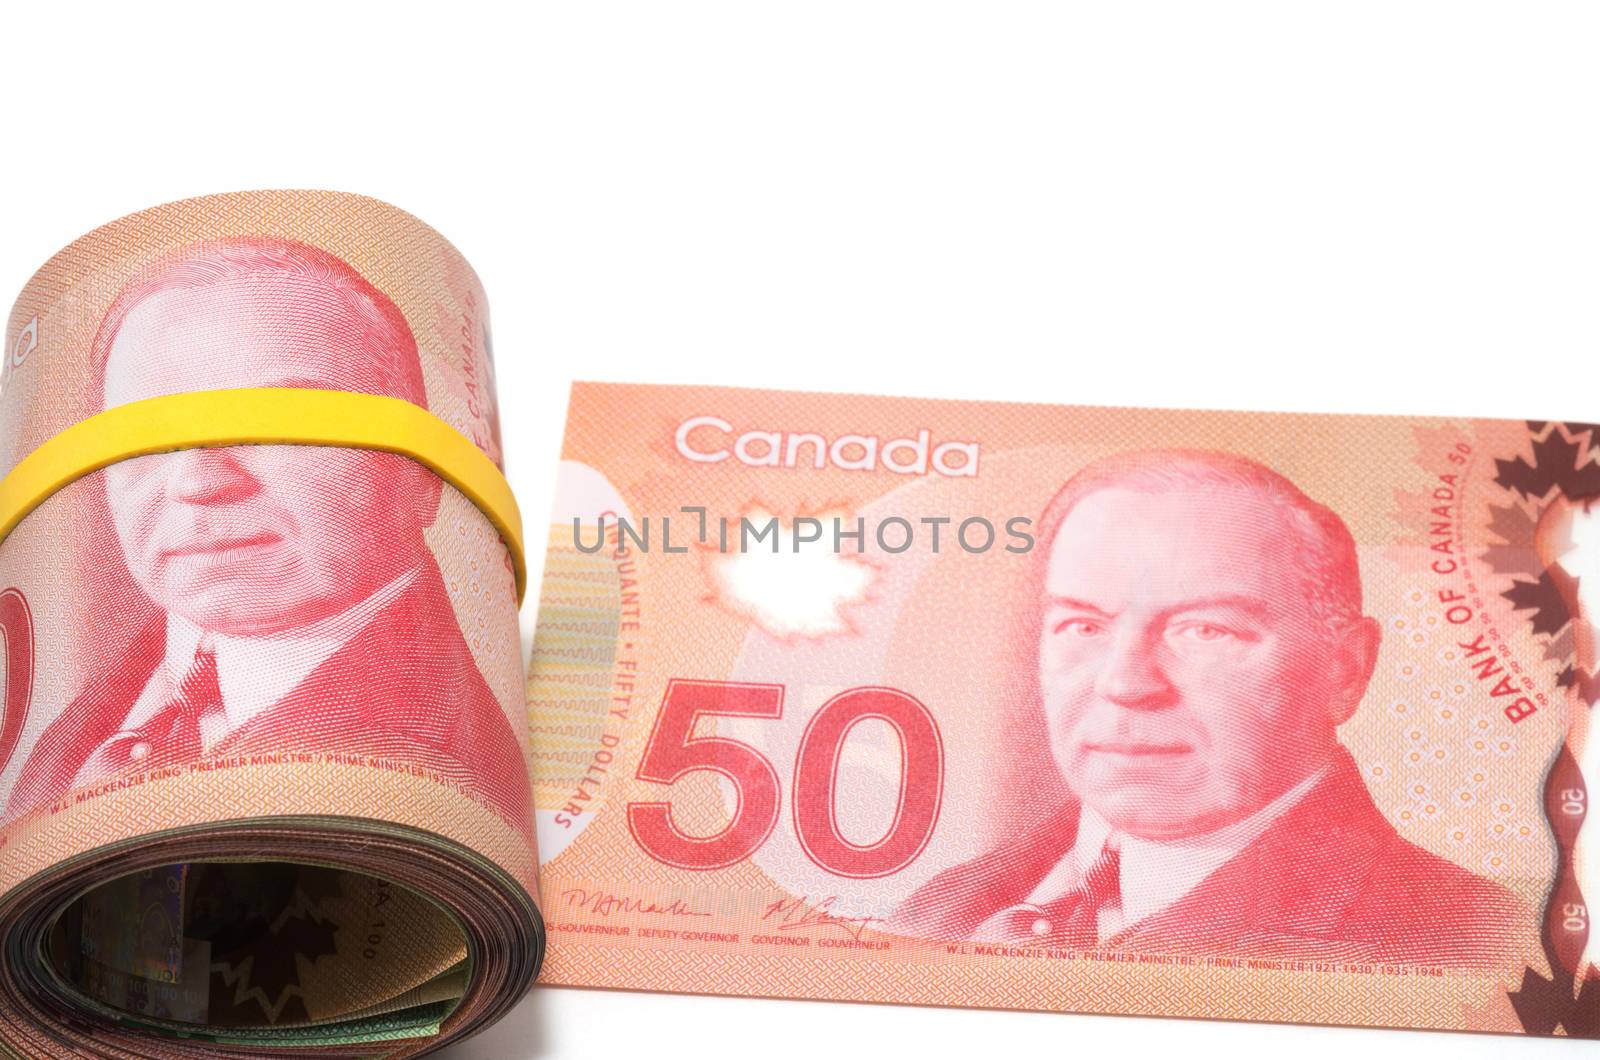 Series of Canadian dollars by daoleduc